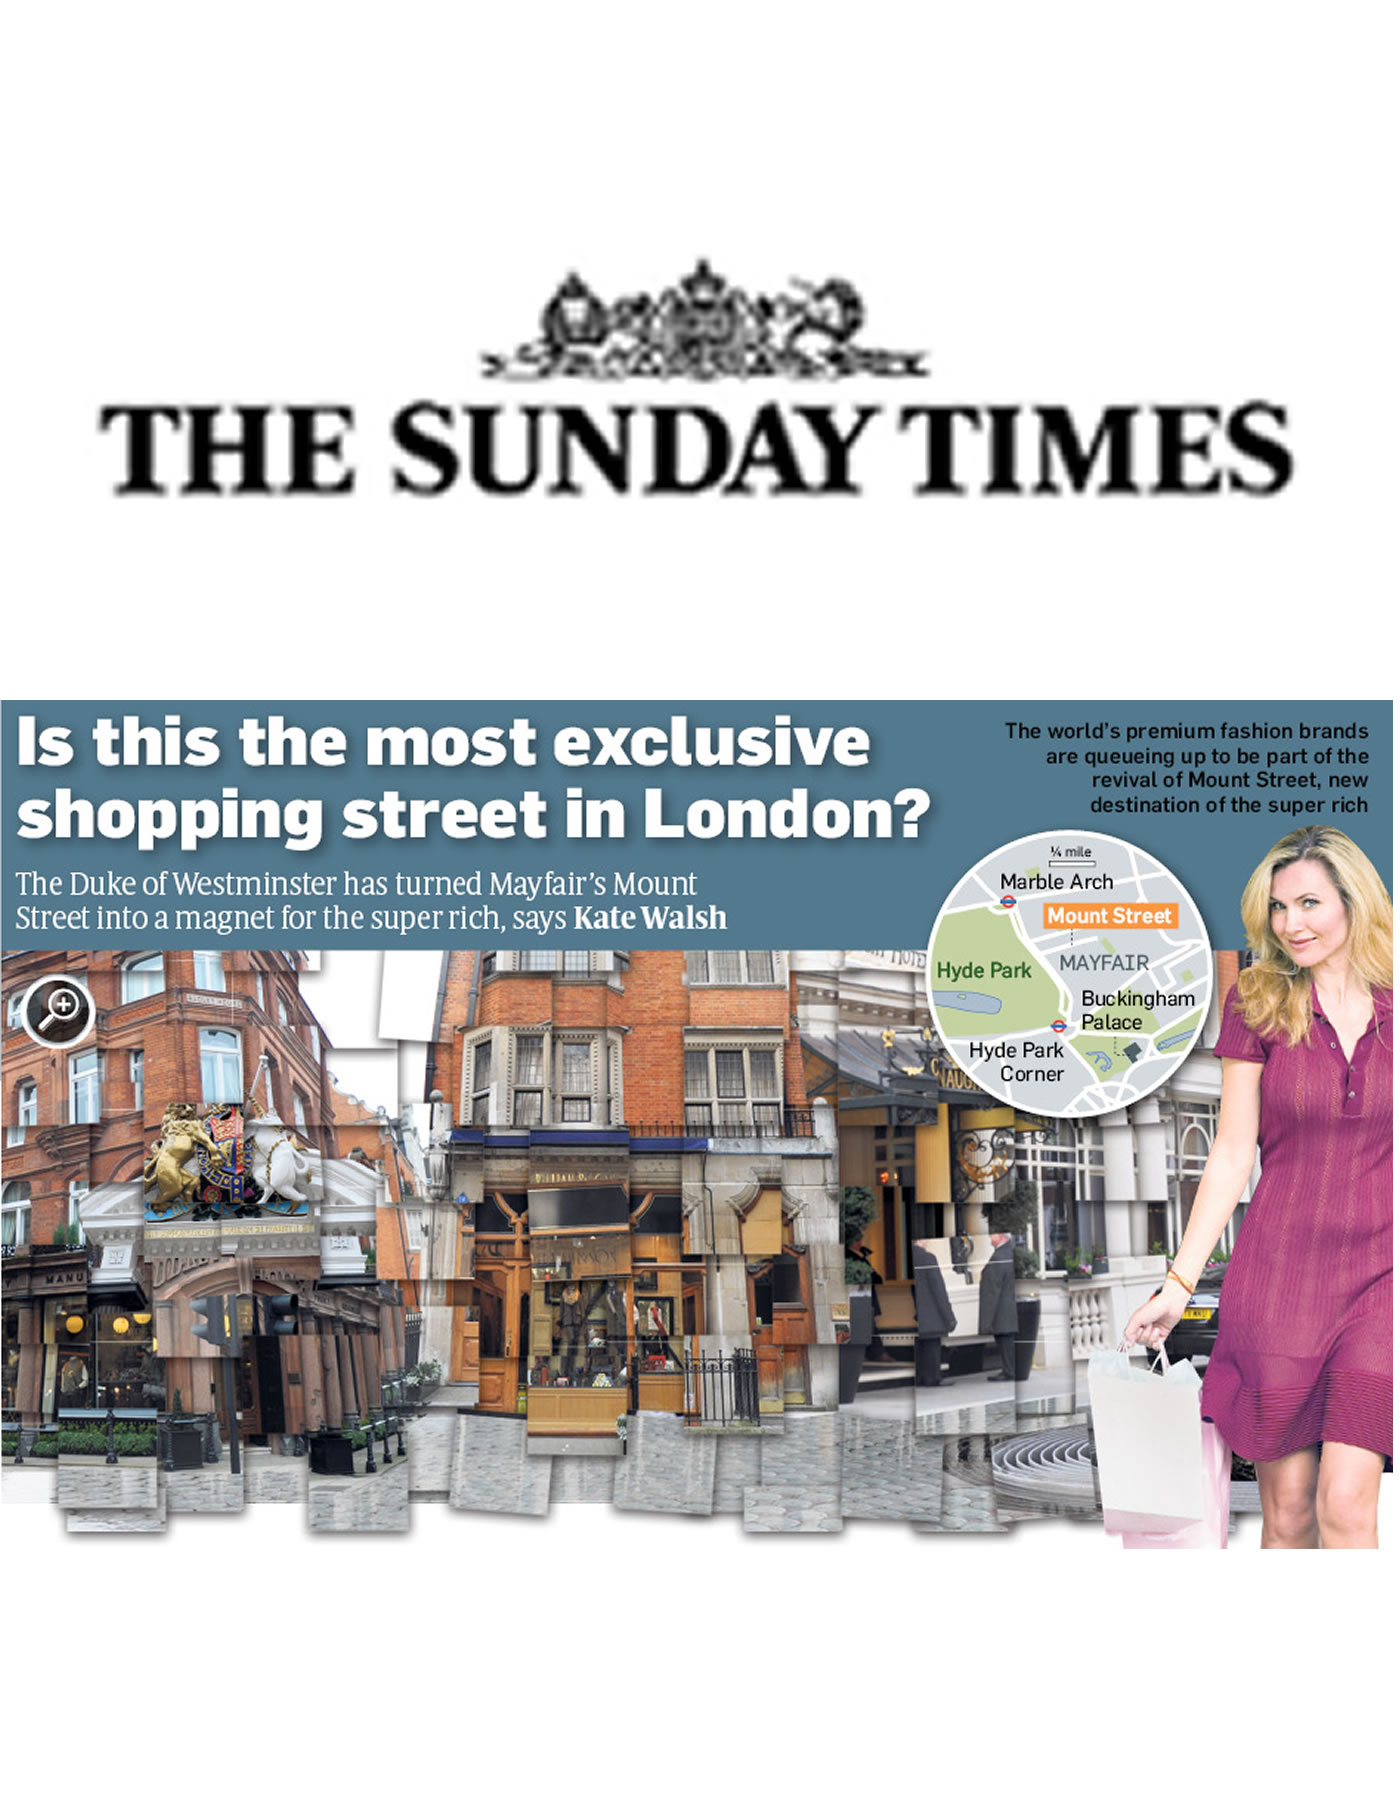 'Is this the most exclusive shopping street in London?' - The Sunday Times on Mark Glenn's Mount Street